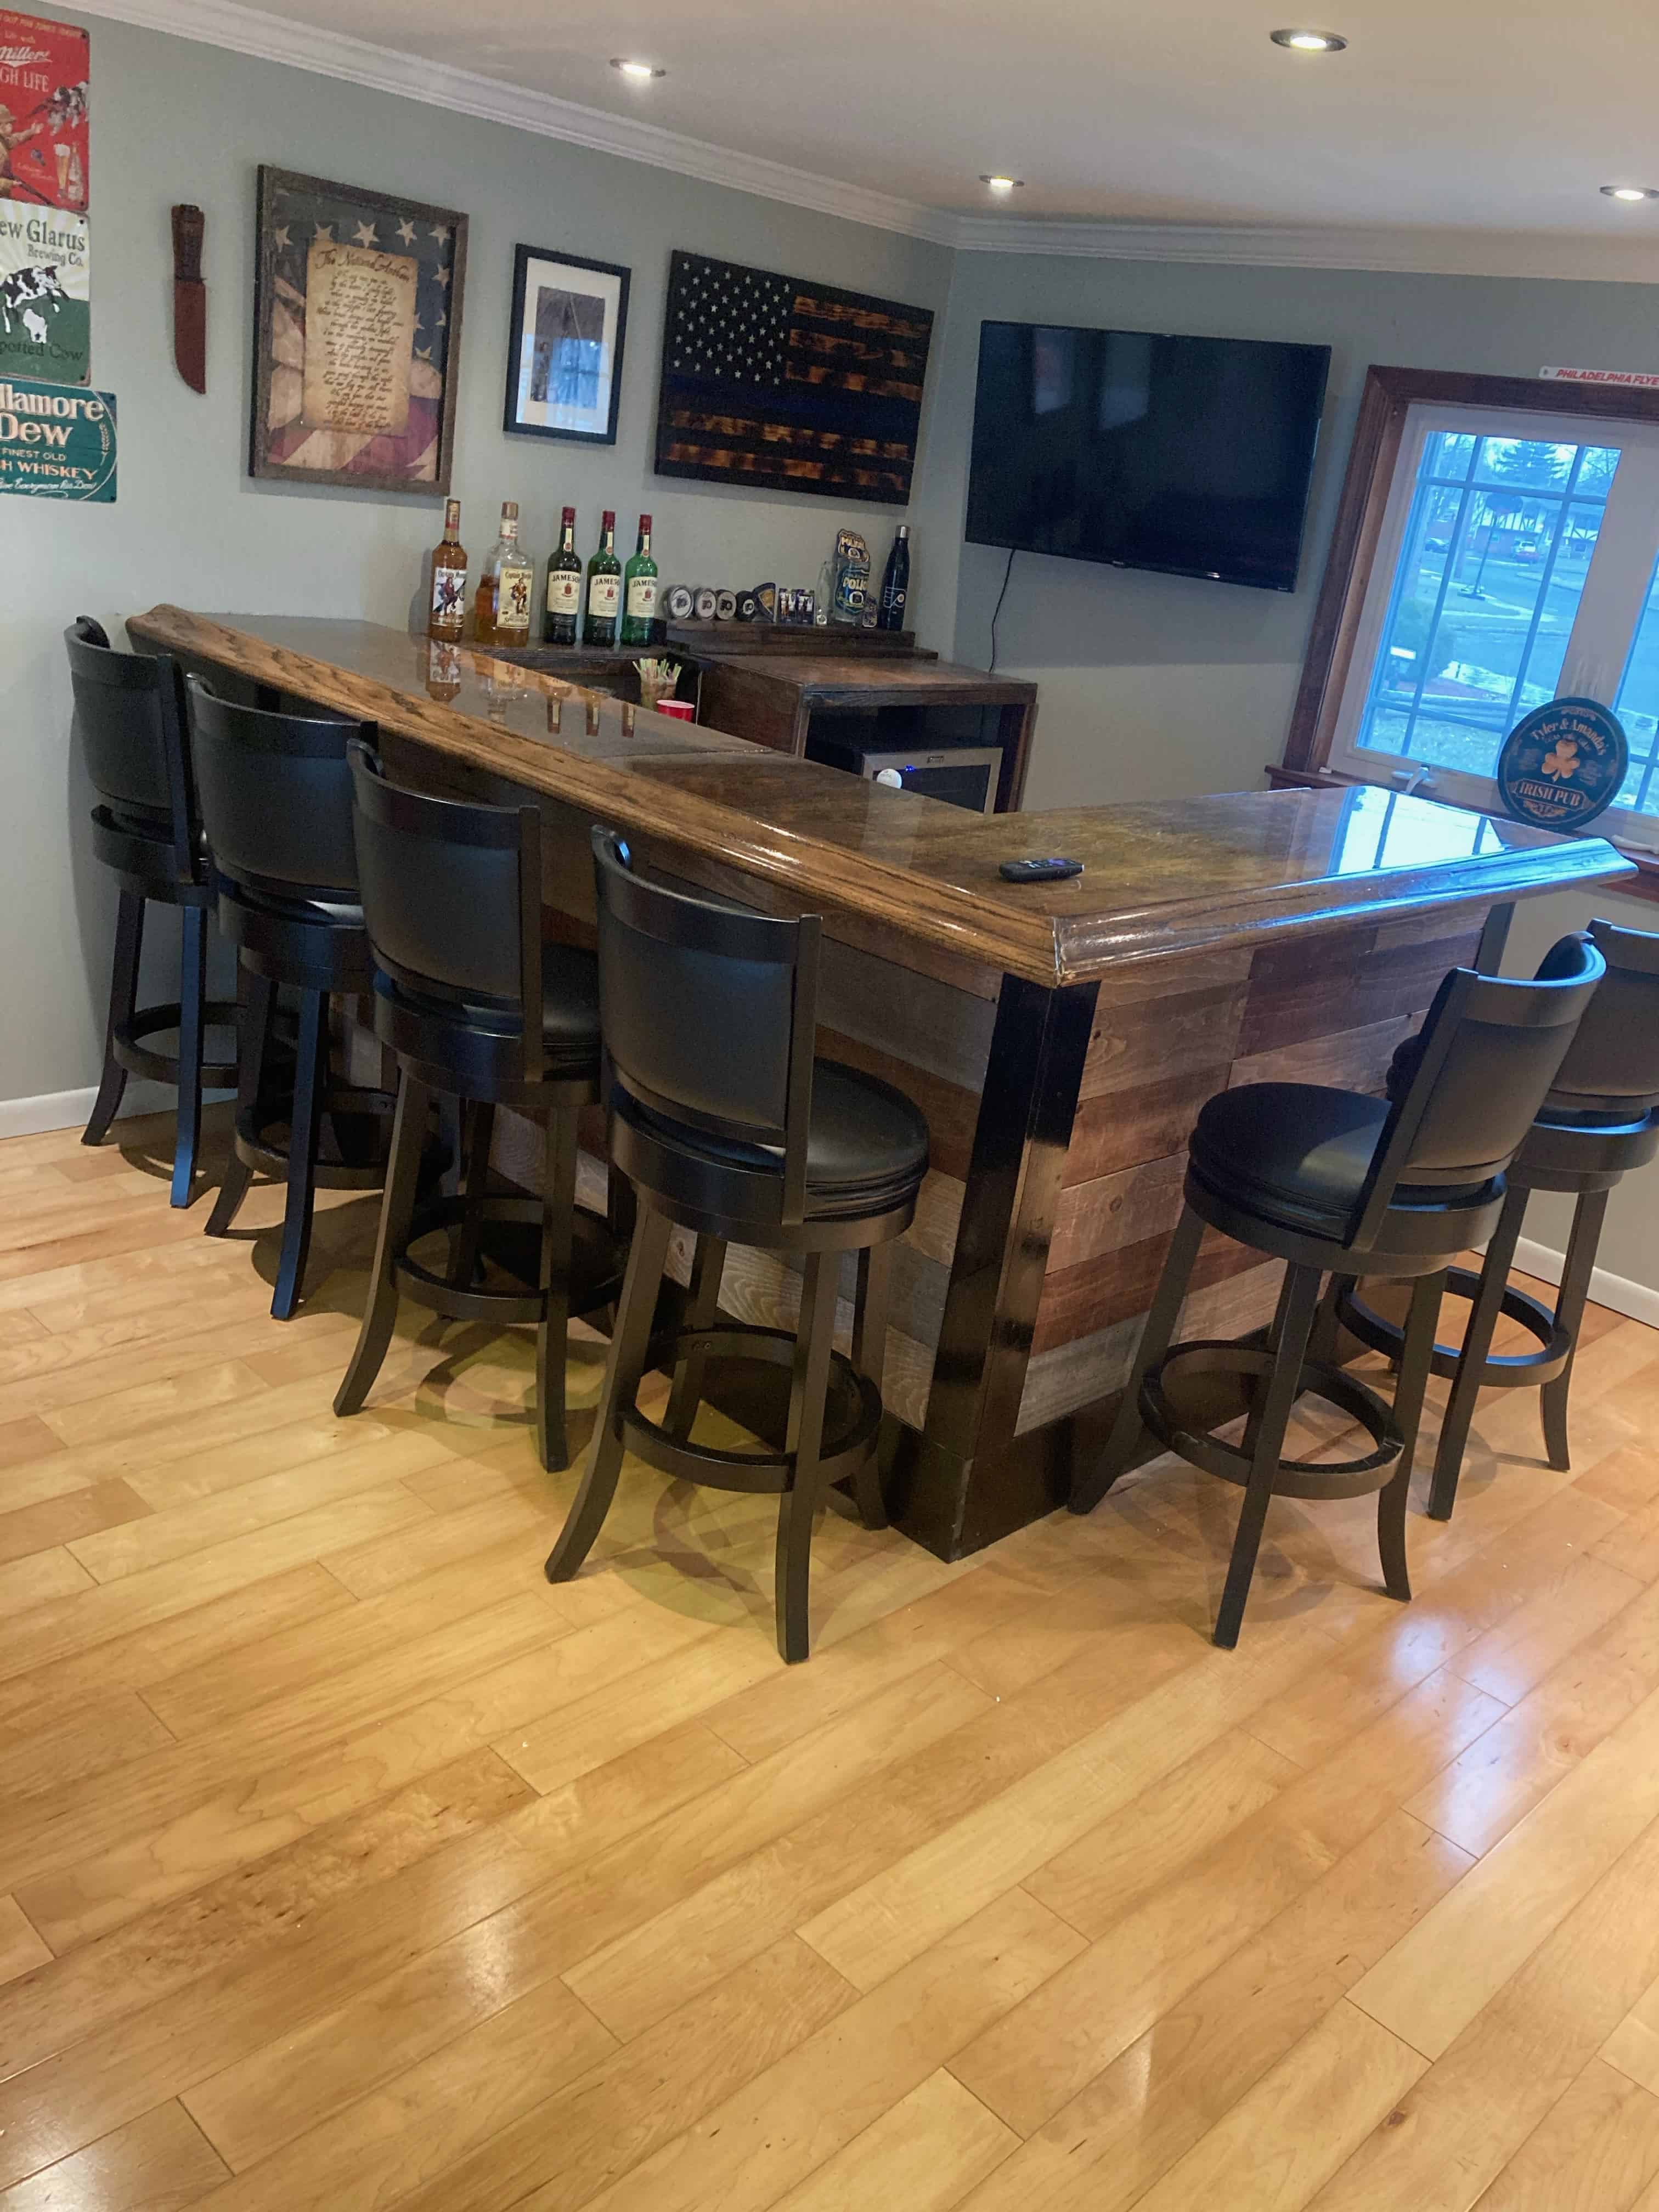 Basement Bar Ideas That You Haven't Seen Before   Rock Solid Rustic